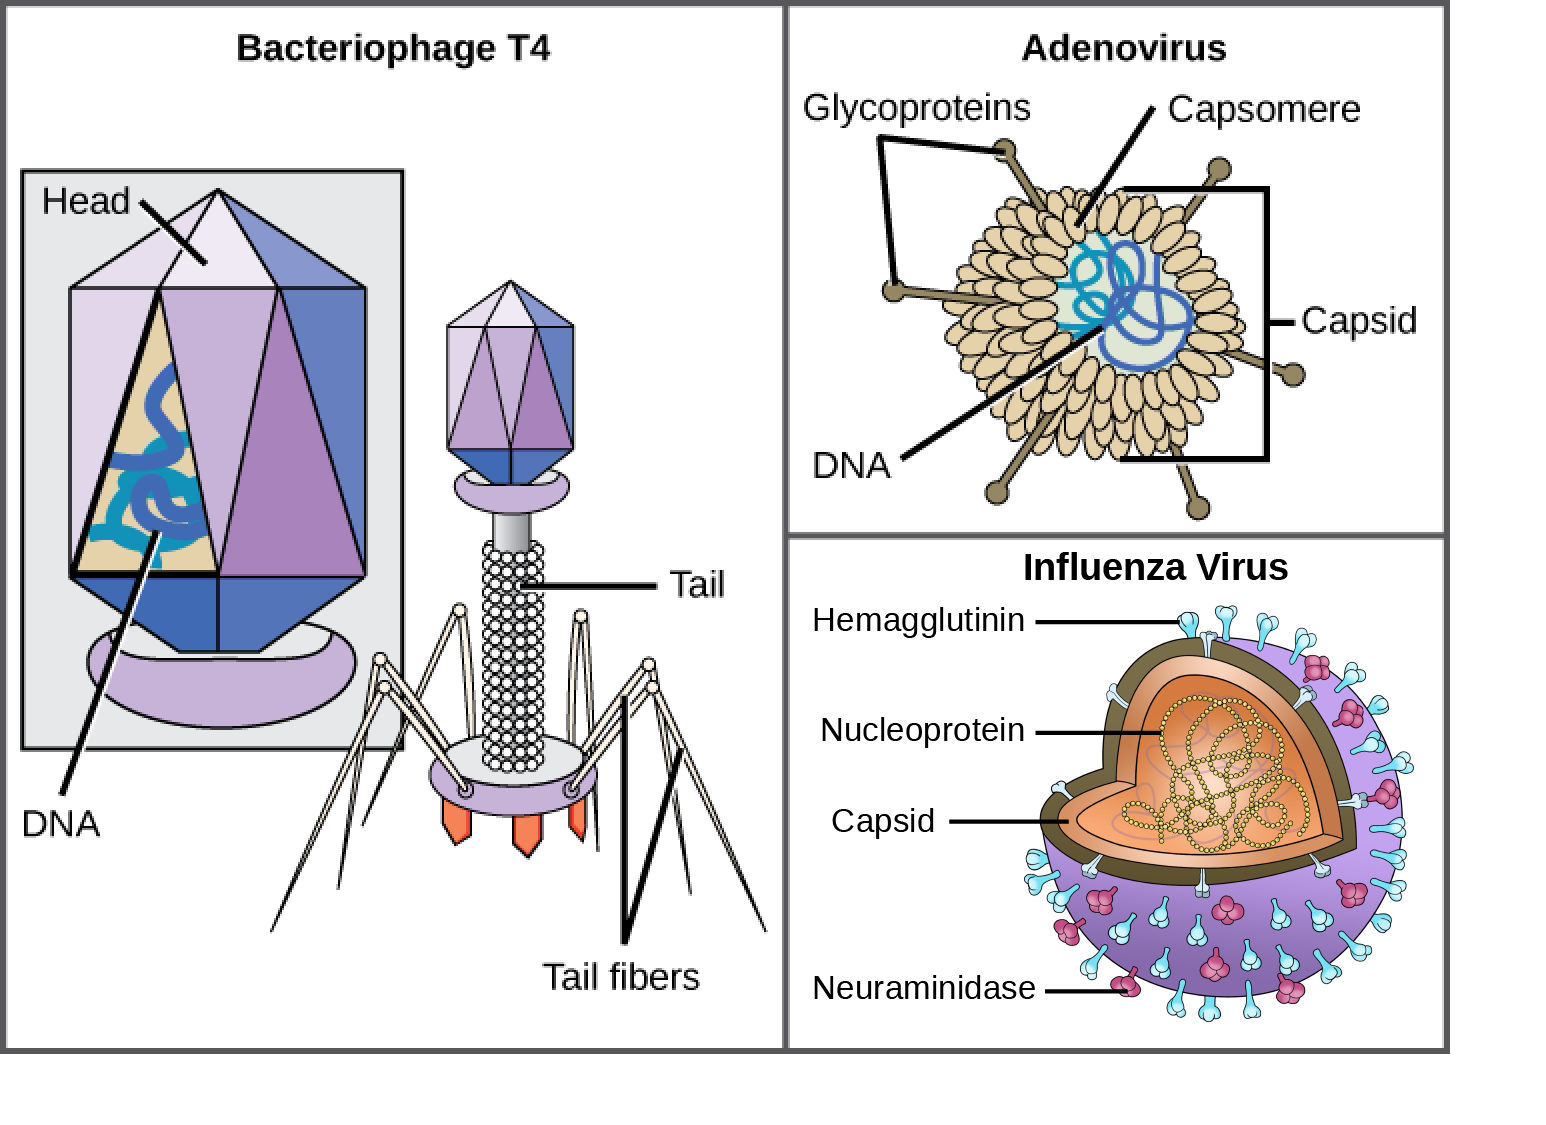 Illustration a shows bacteriophage T 4, which houses its D N A genome in a hexagonal head. A long, straight tail extends from the bottom of the head. Tail fibers attached to the base of the tail are bent, like spider legs. In b, adenovirus houses its D N A genome in a round capsid made from many small capsomere subunits. Glycoproteins extend from the capsomere, like pins from a pincushion. In c, the H I V retrovirus houses its R N A genome and a bullet-shaped capsid. A spherical viral envelope, lined with matrix proteins, surrounds the capsid. Two different varieties of glycoprotein spike are embedded in the envelope. Approximately 80 percent of the spikes are hemagglutinin. The remaining 20 percent or so of the glycoprotein spikes consist of neuraminidase.